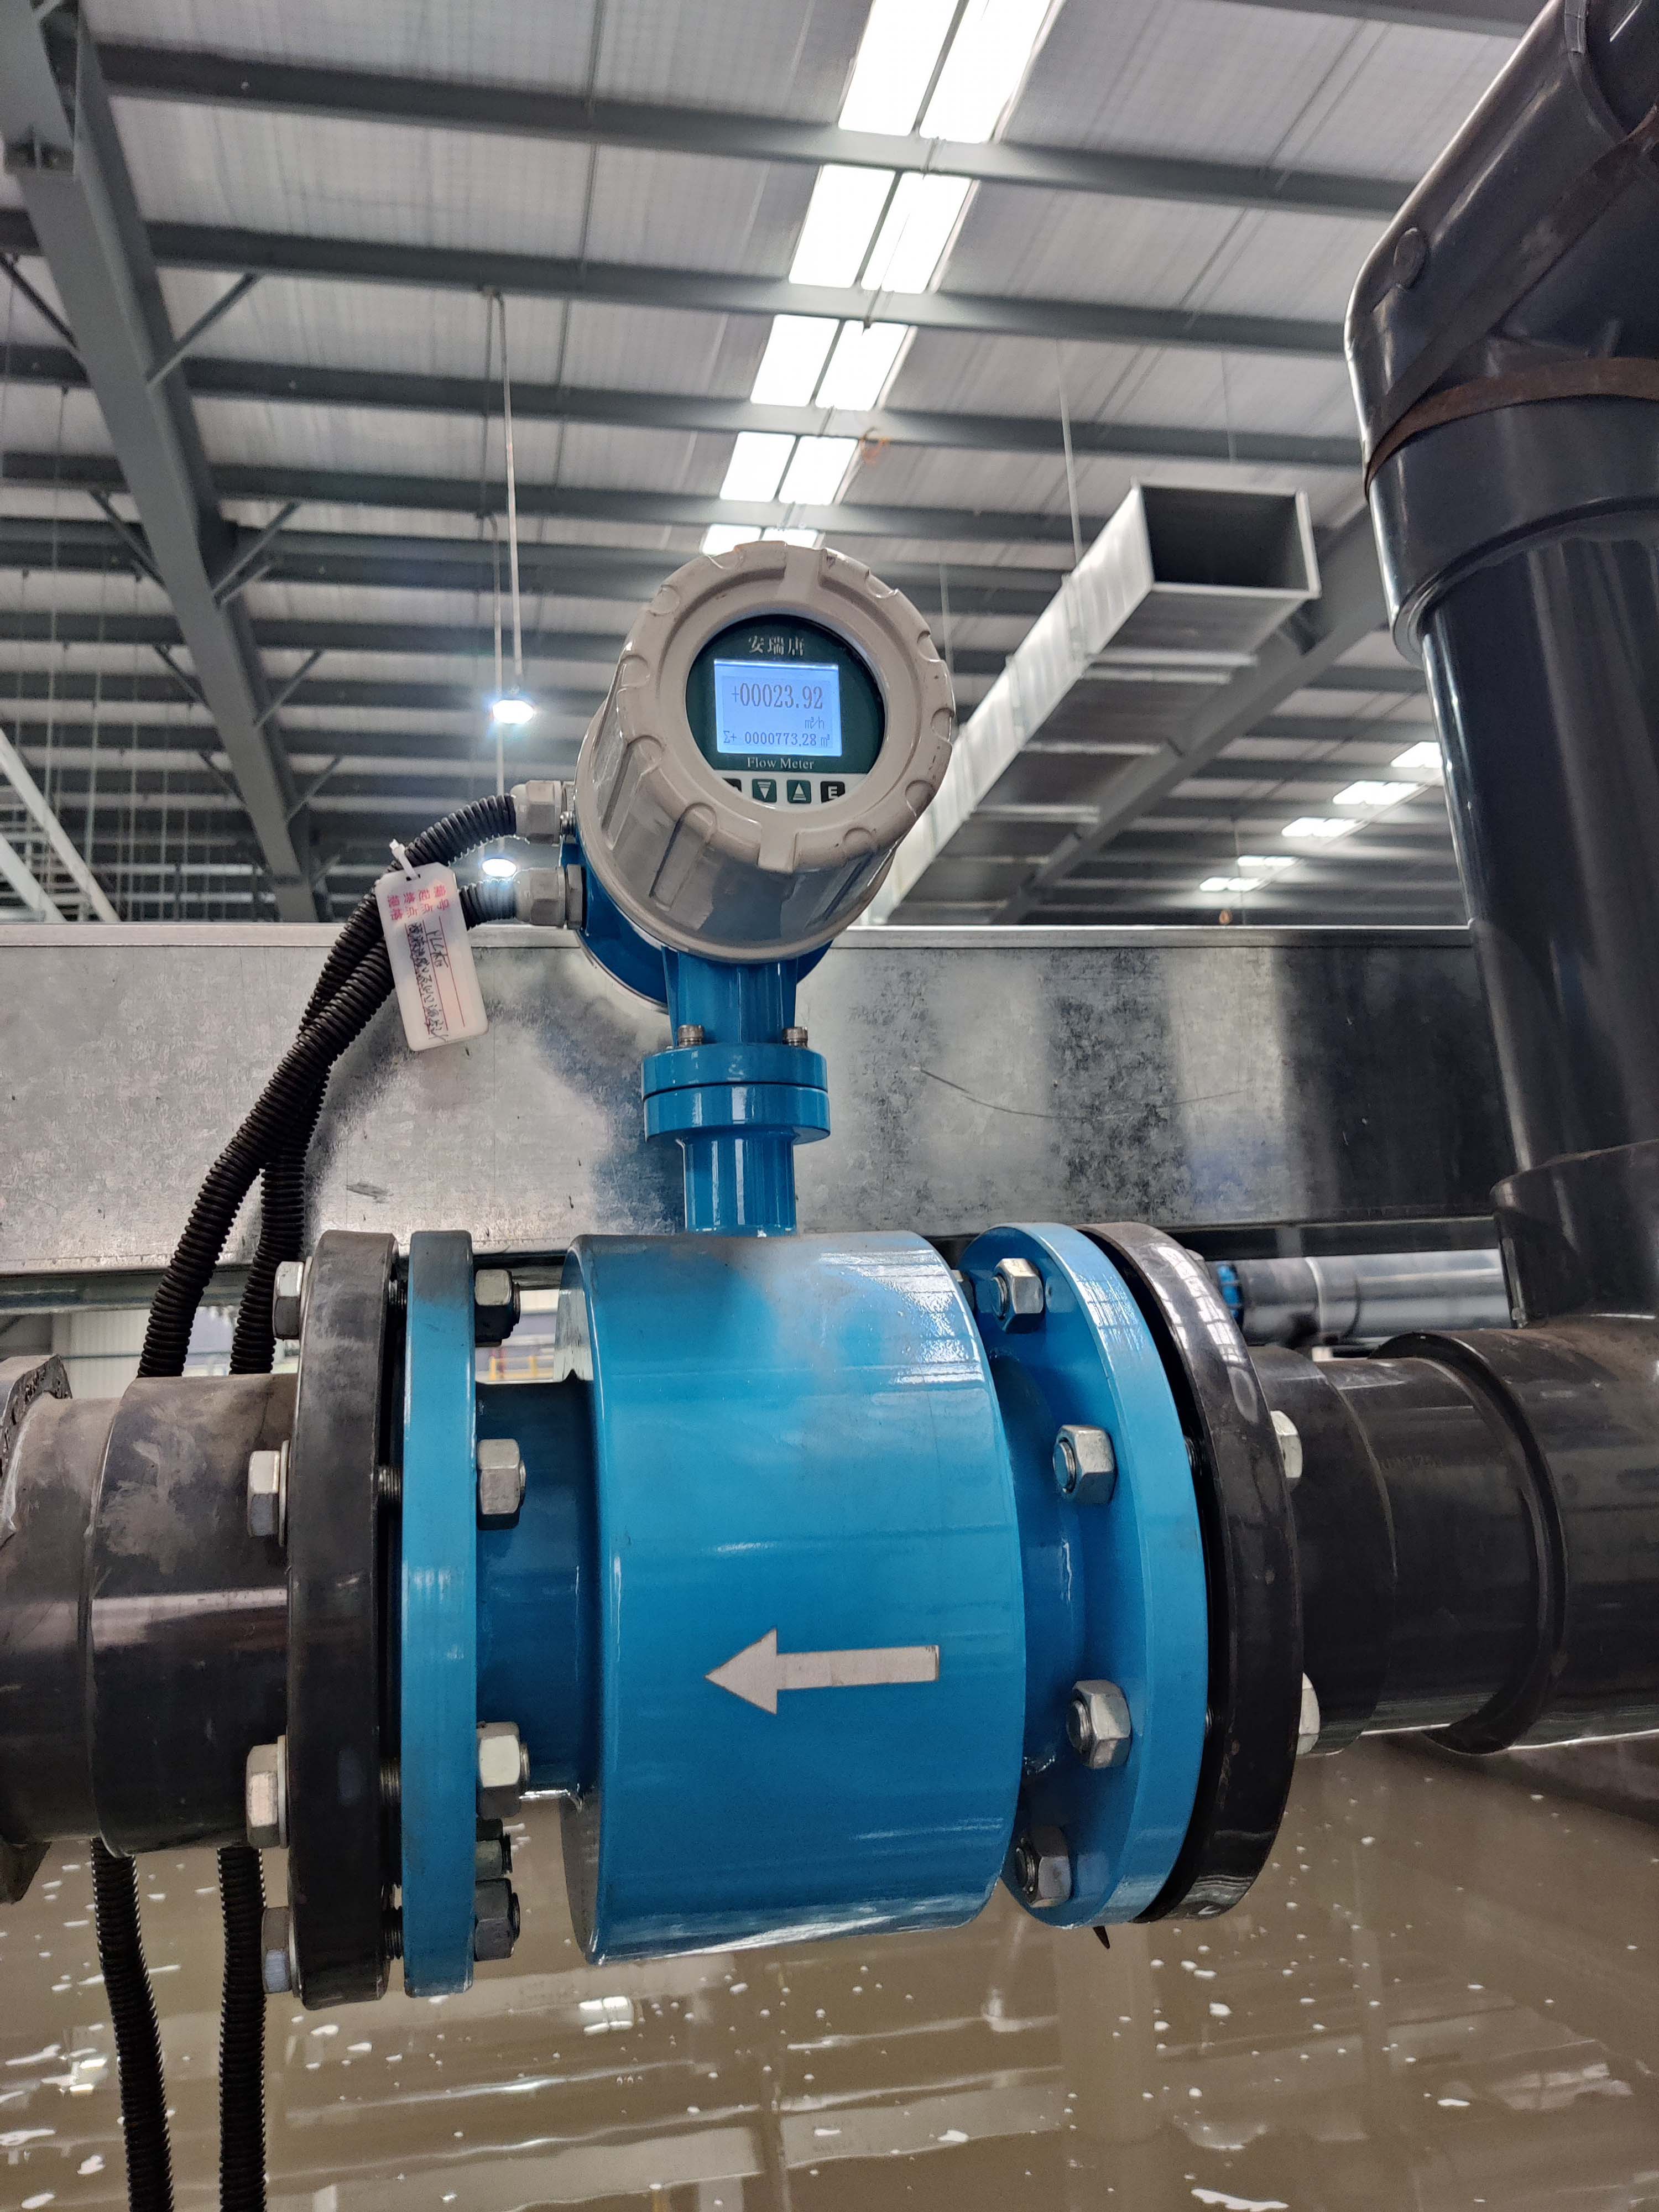 What does the electromagnetic flowmeter mainly measure?